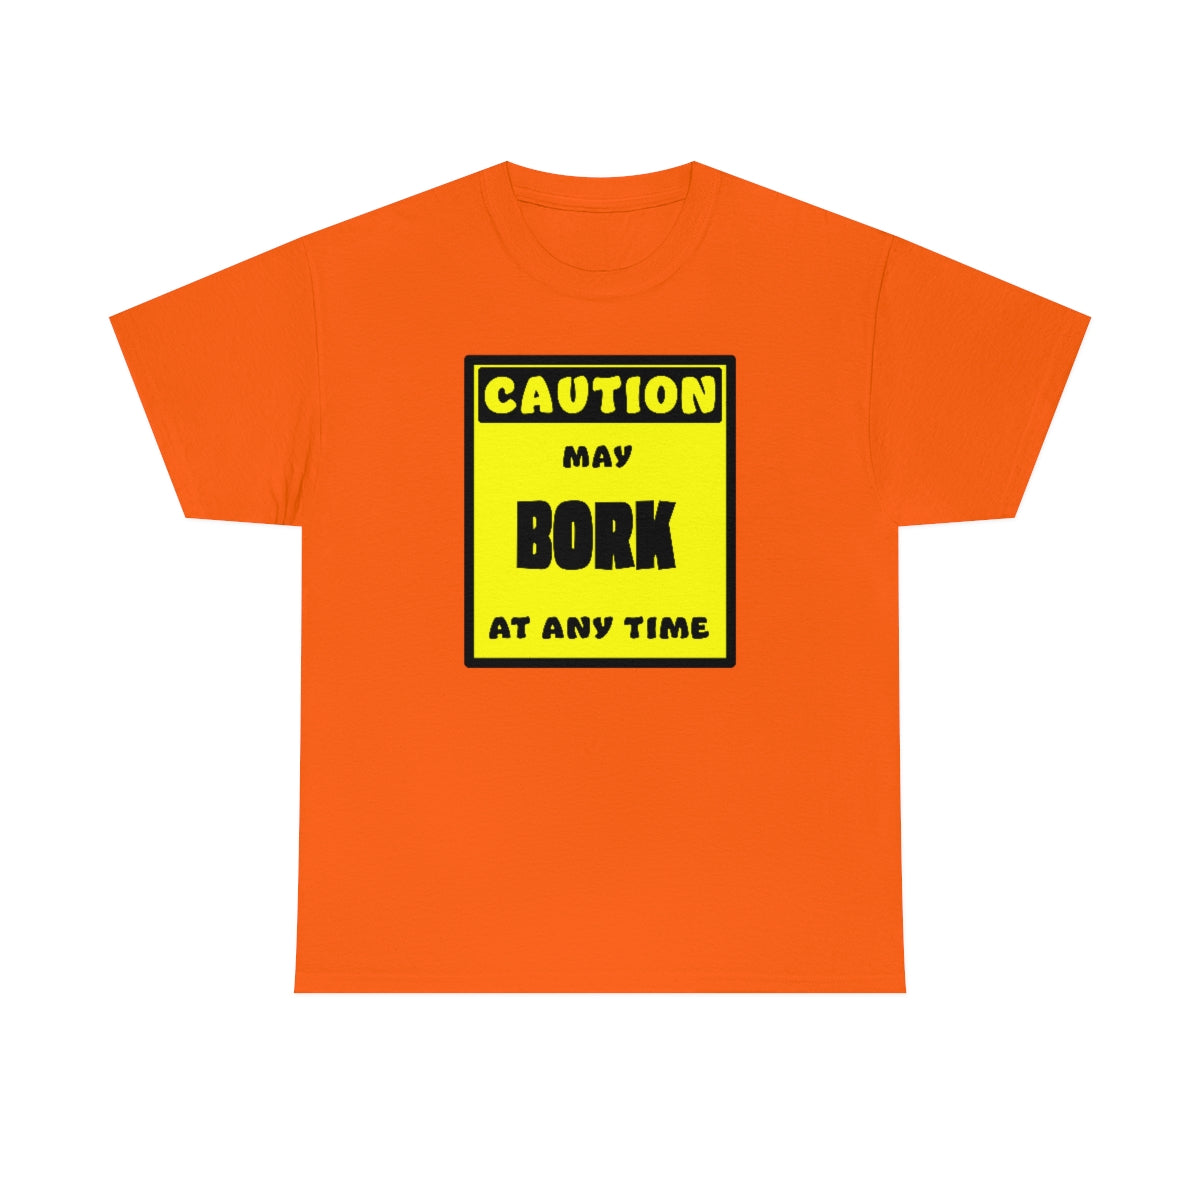 CAUTION! May BORK at any time! - T-Shirt T-Shirt AFLT-Whootorca Orange S 